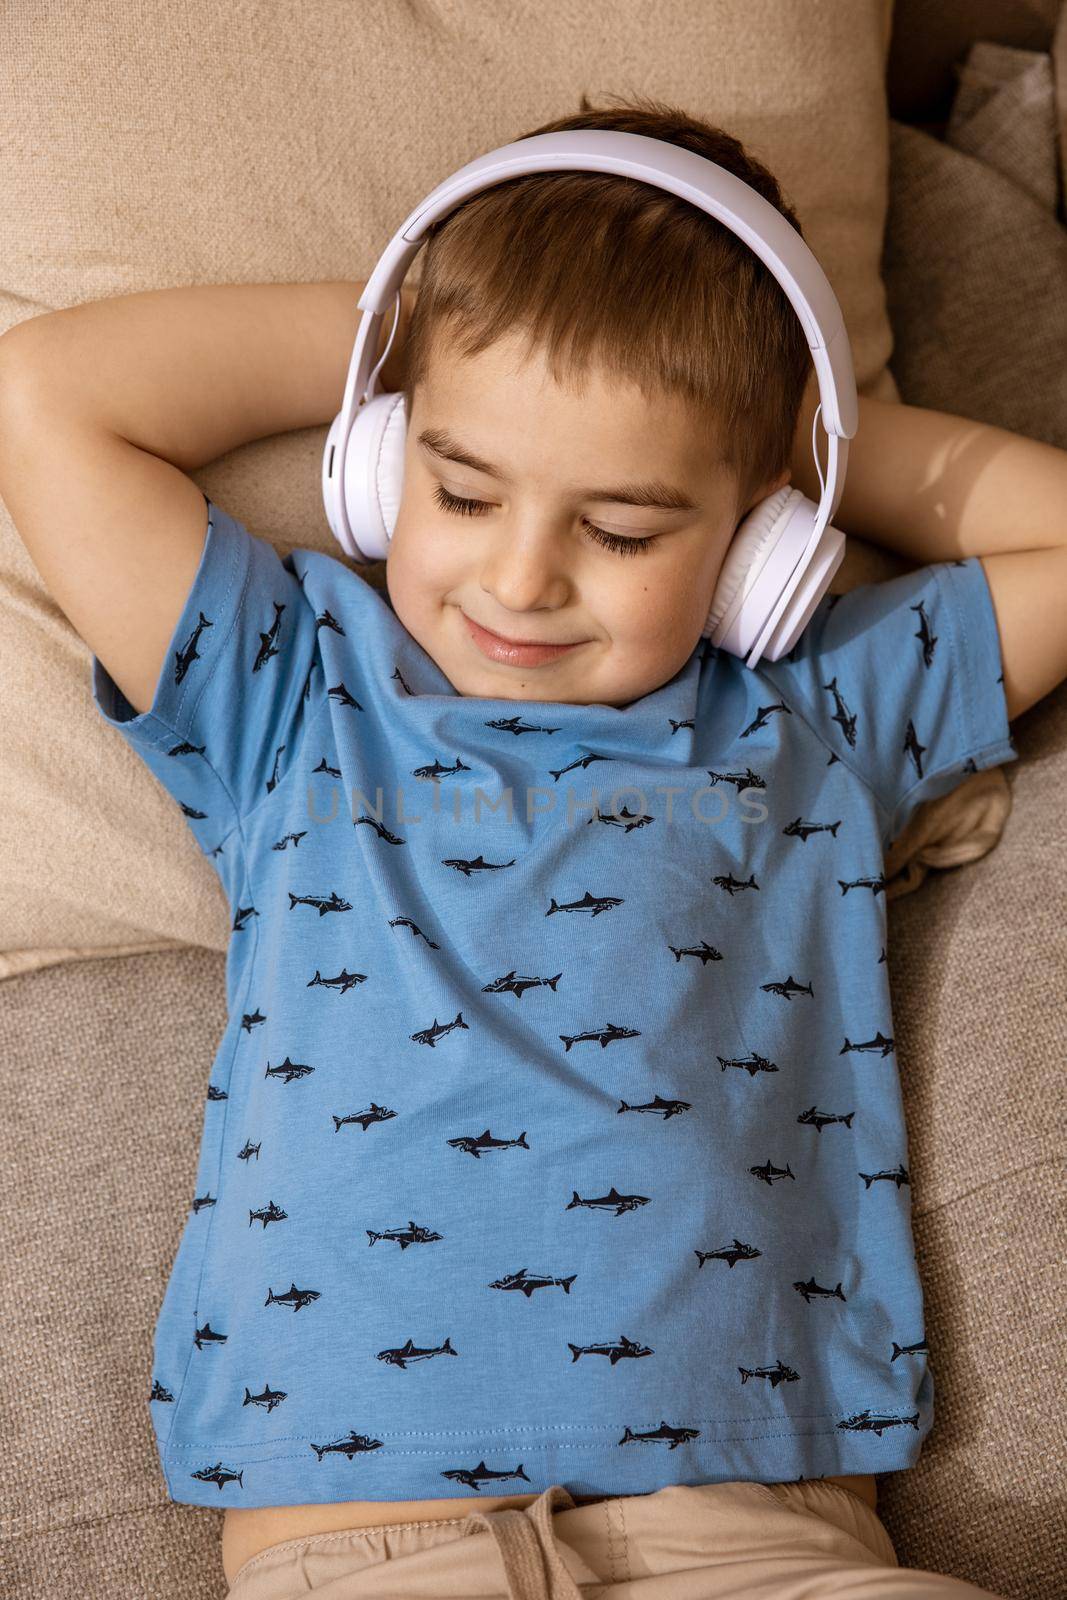 Little caucasian boy with blue shirt and white headphones listening music or audio book on the couch at home. Cute child relaxing, resting in his room. by creativebird